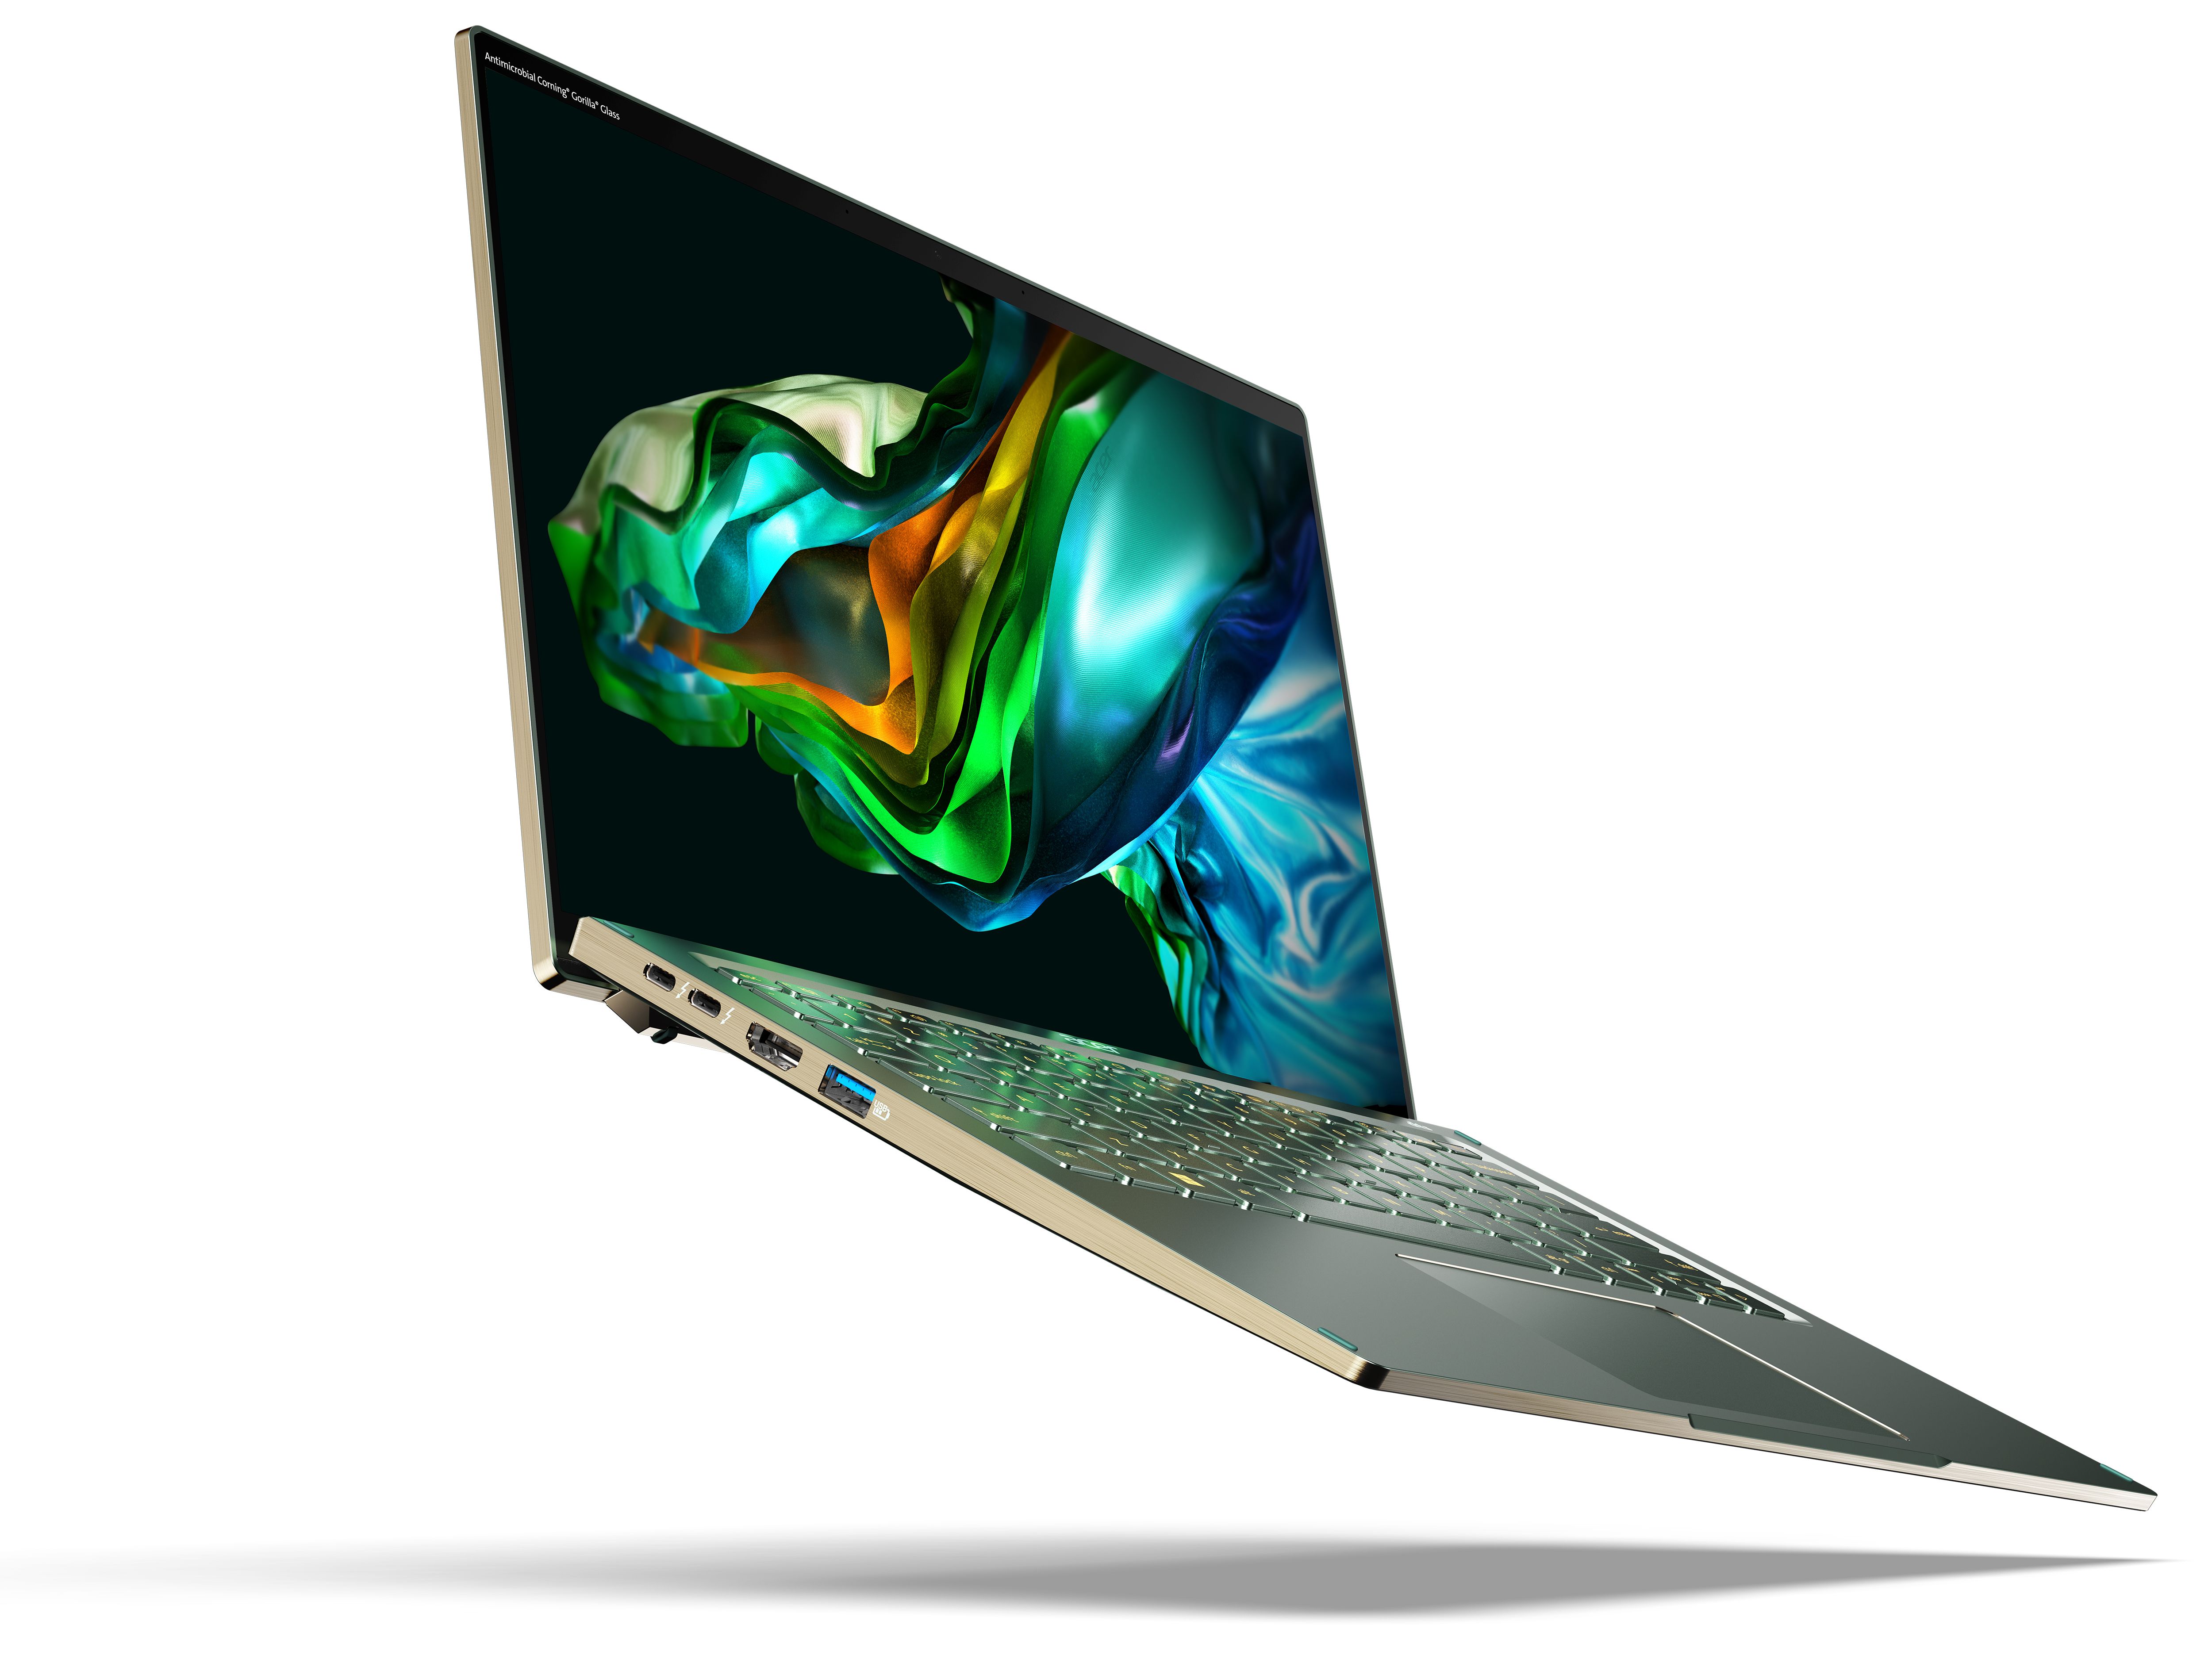 The new Acer Swift Go laptops have 13thgen Intel processors and OLED